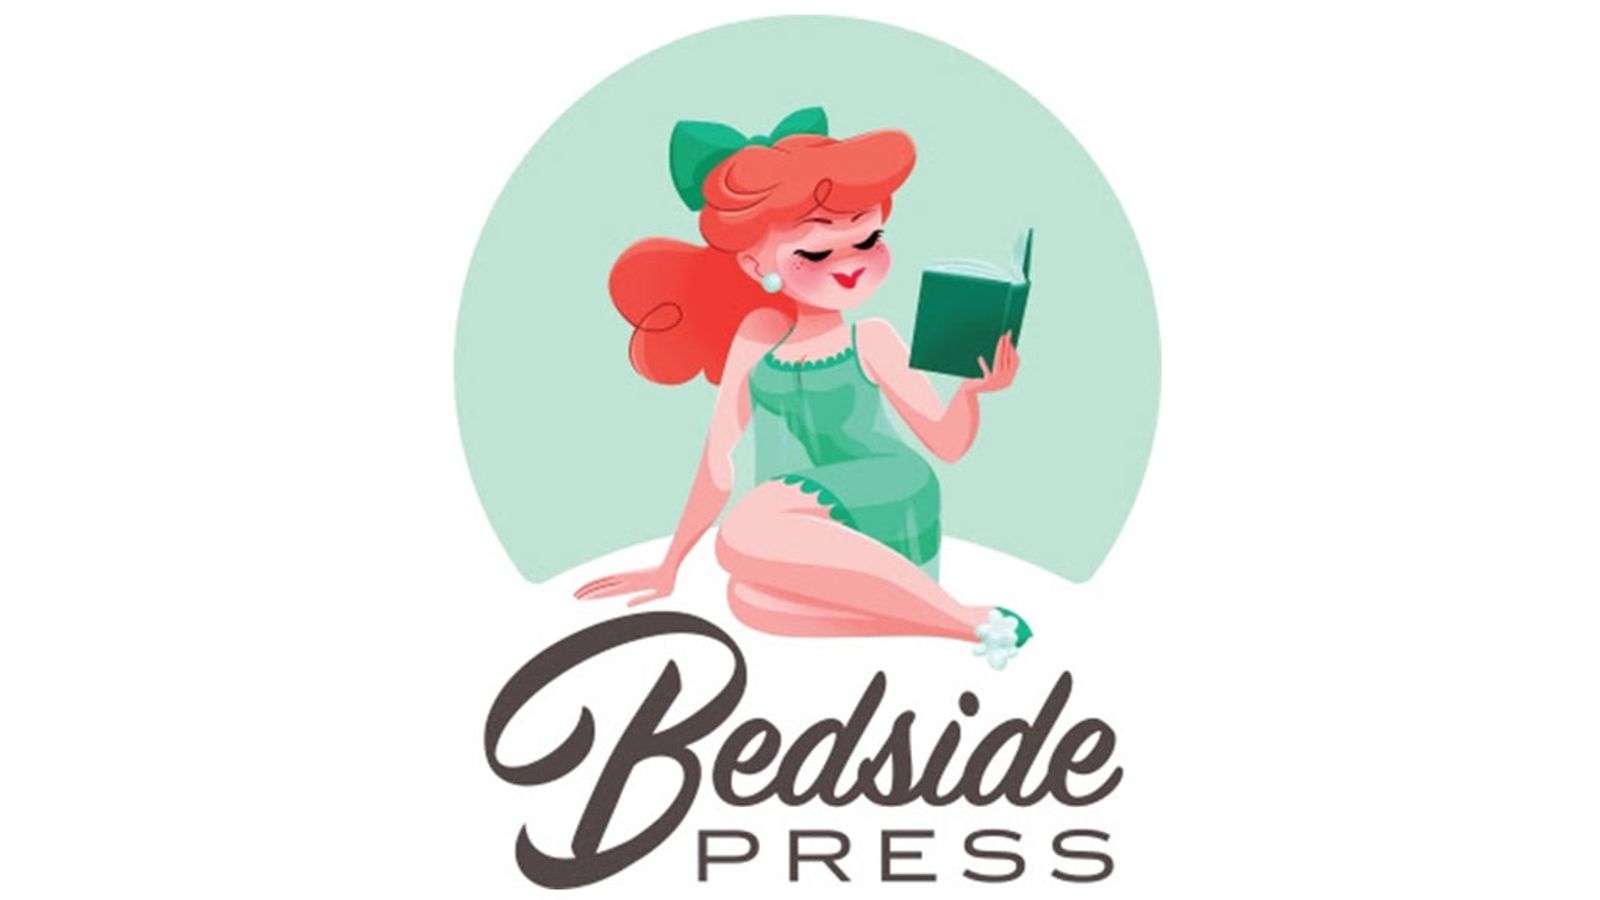 Bedside Press Looking For Submissions For TG-Friendly Anthology